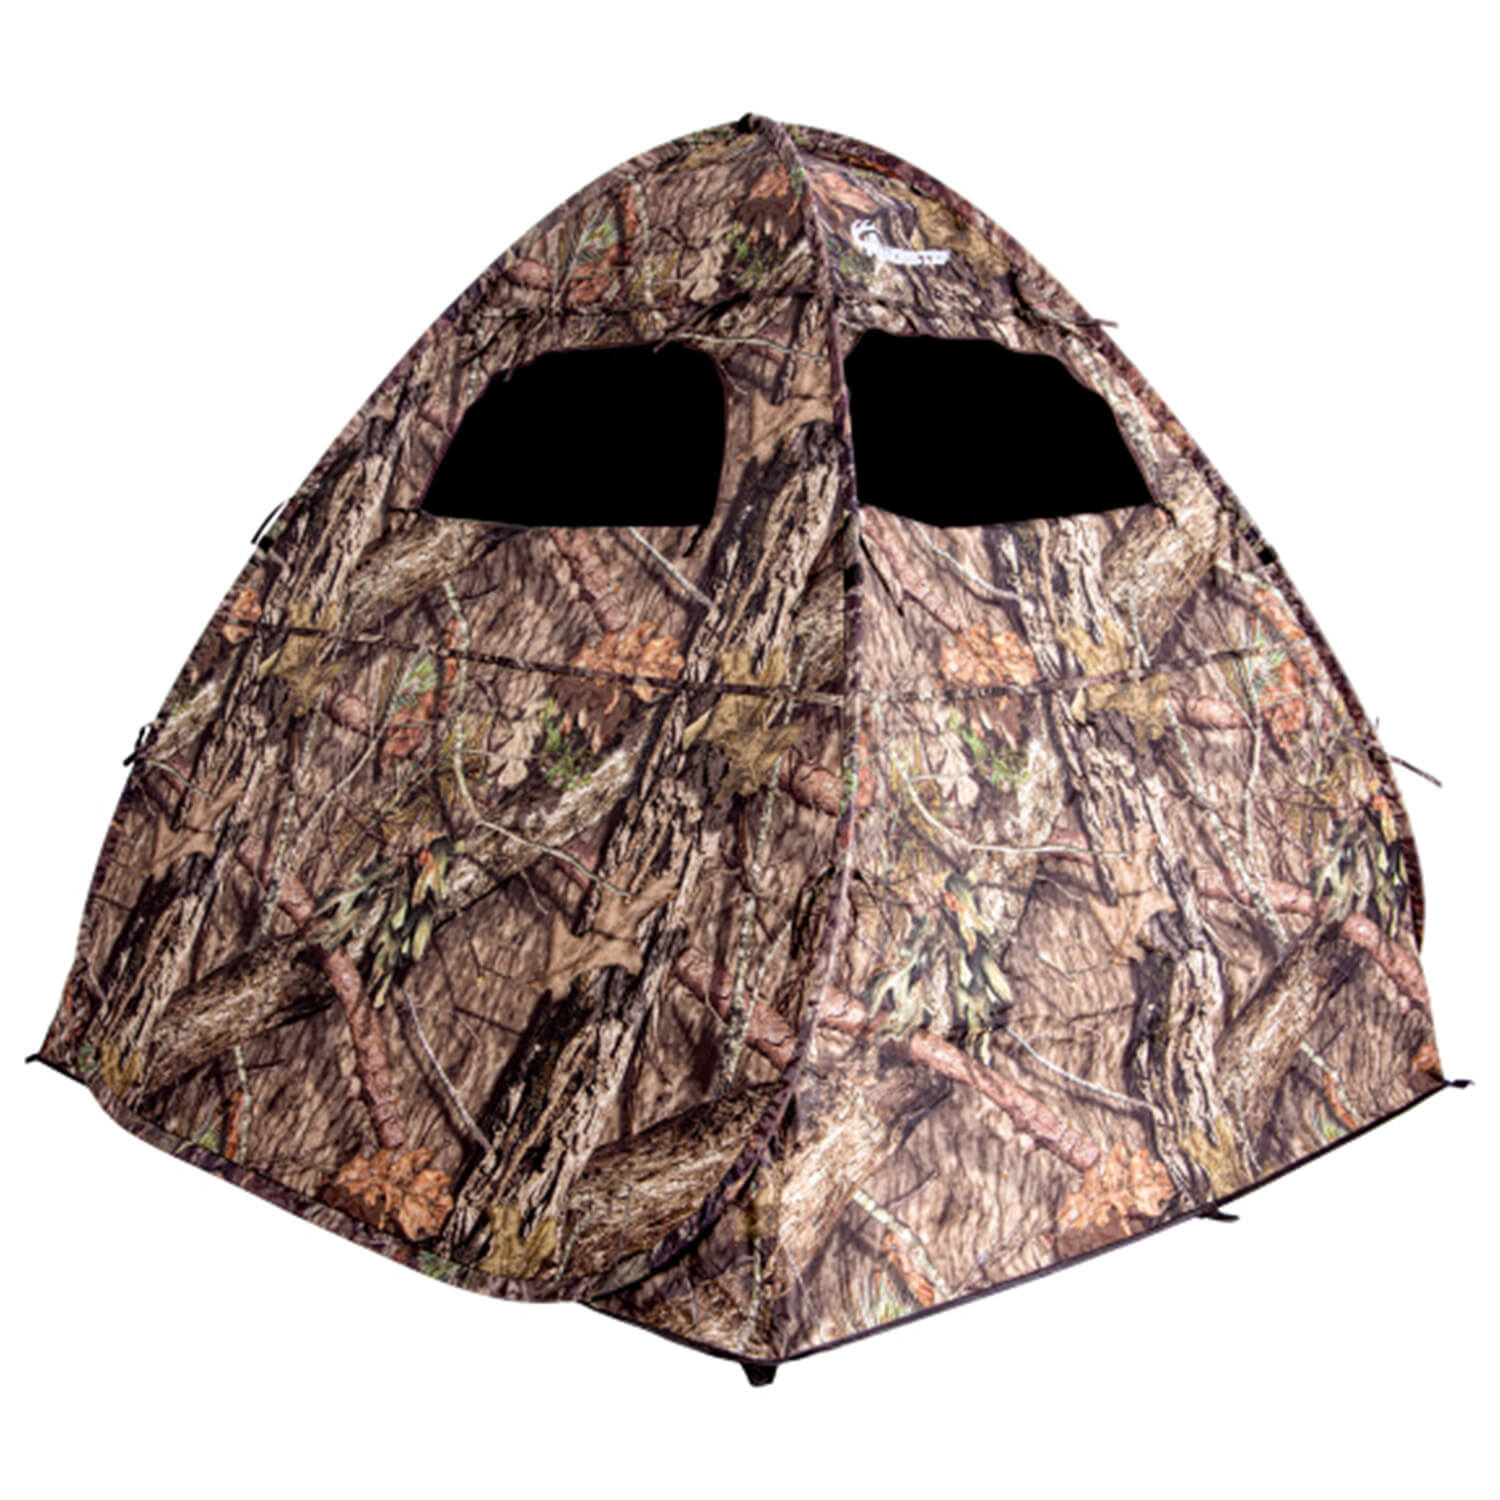 Ameristep Camouflage Tent Blind Gunnar - Camouflage Tents & Blindes